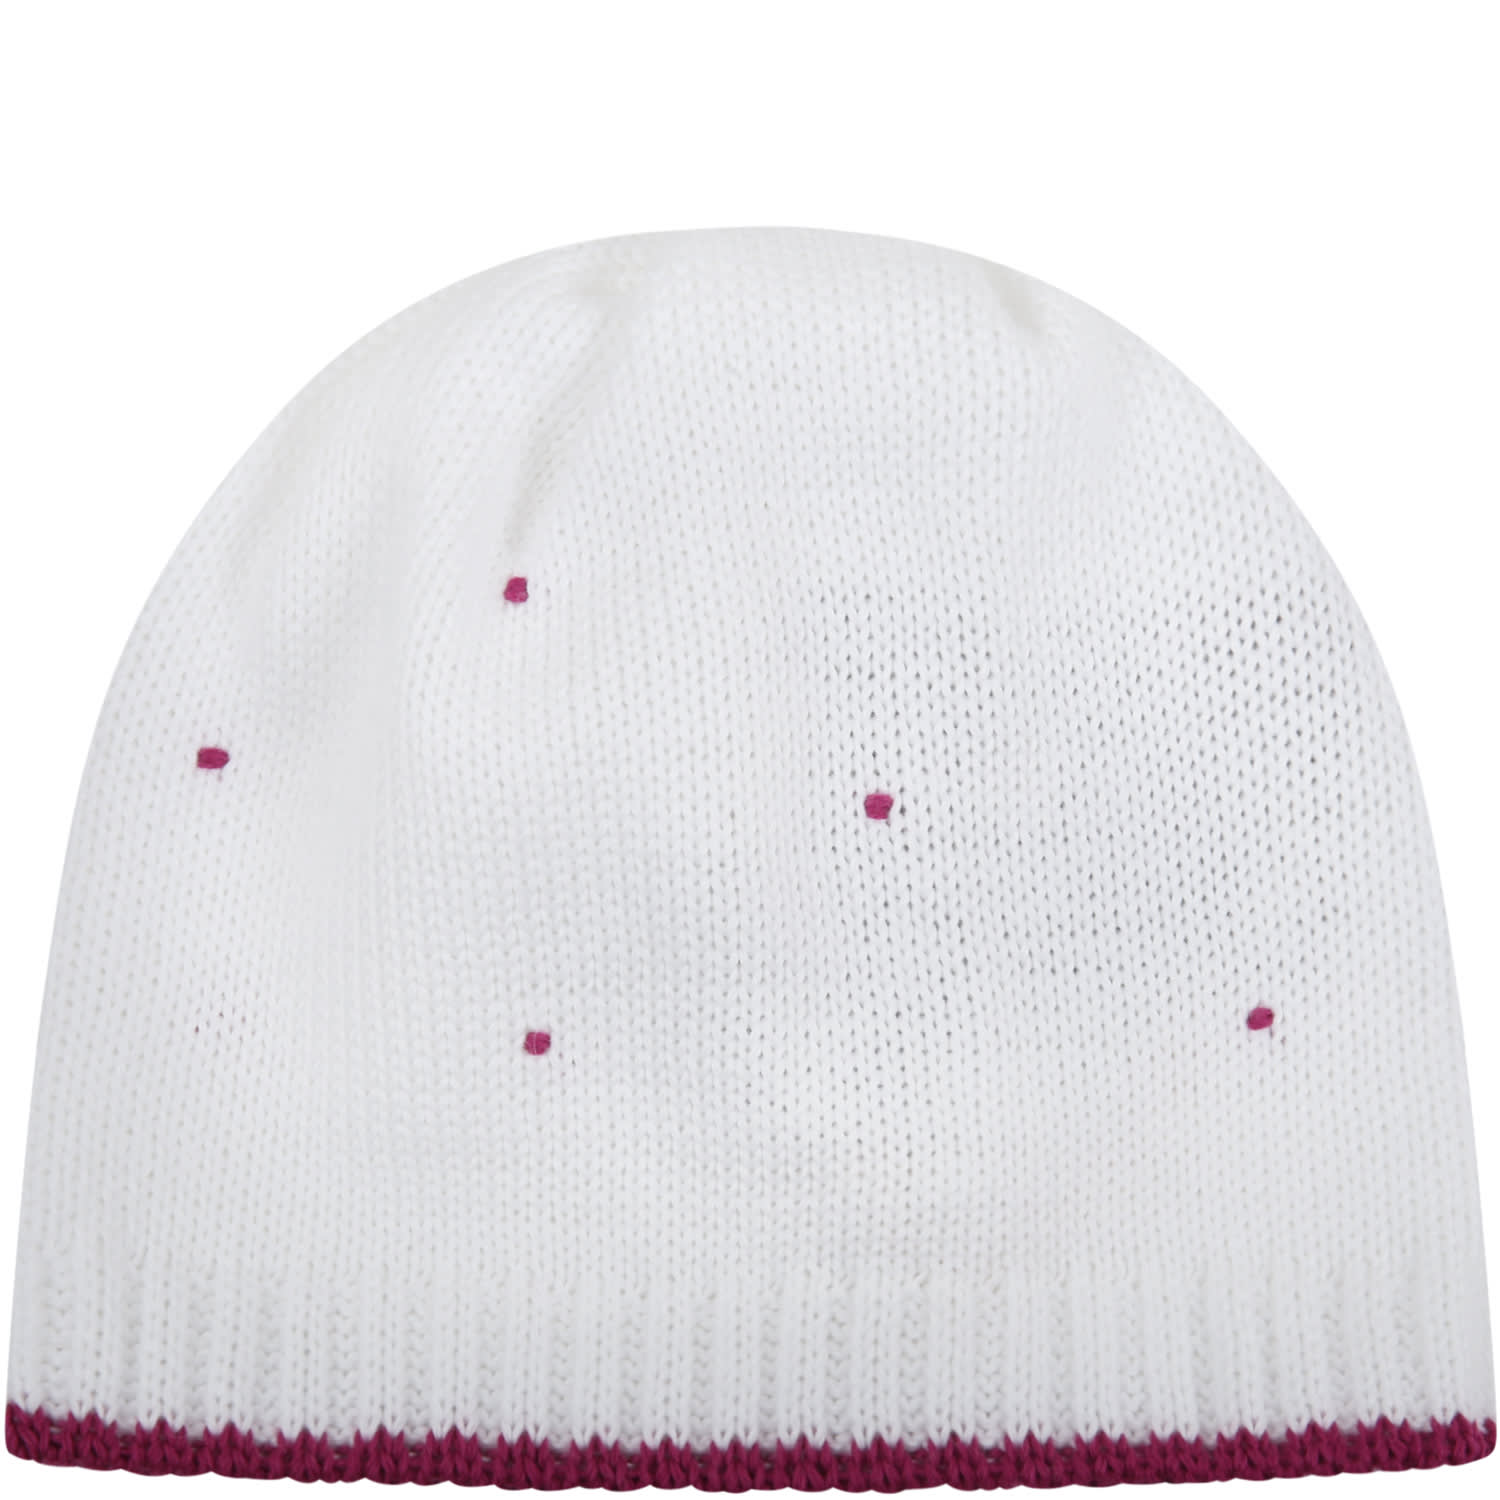 Little Bear White Hat For Babygirl With Polka-dots